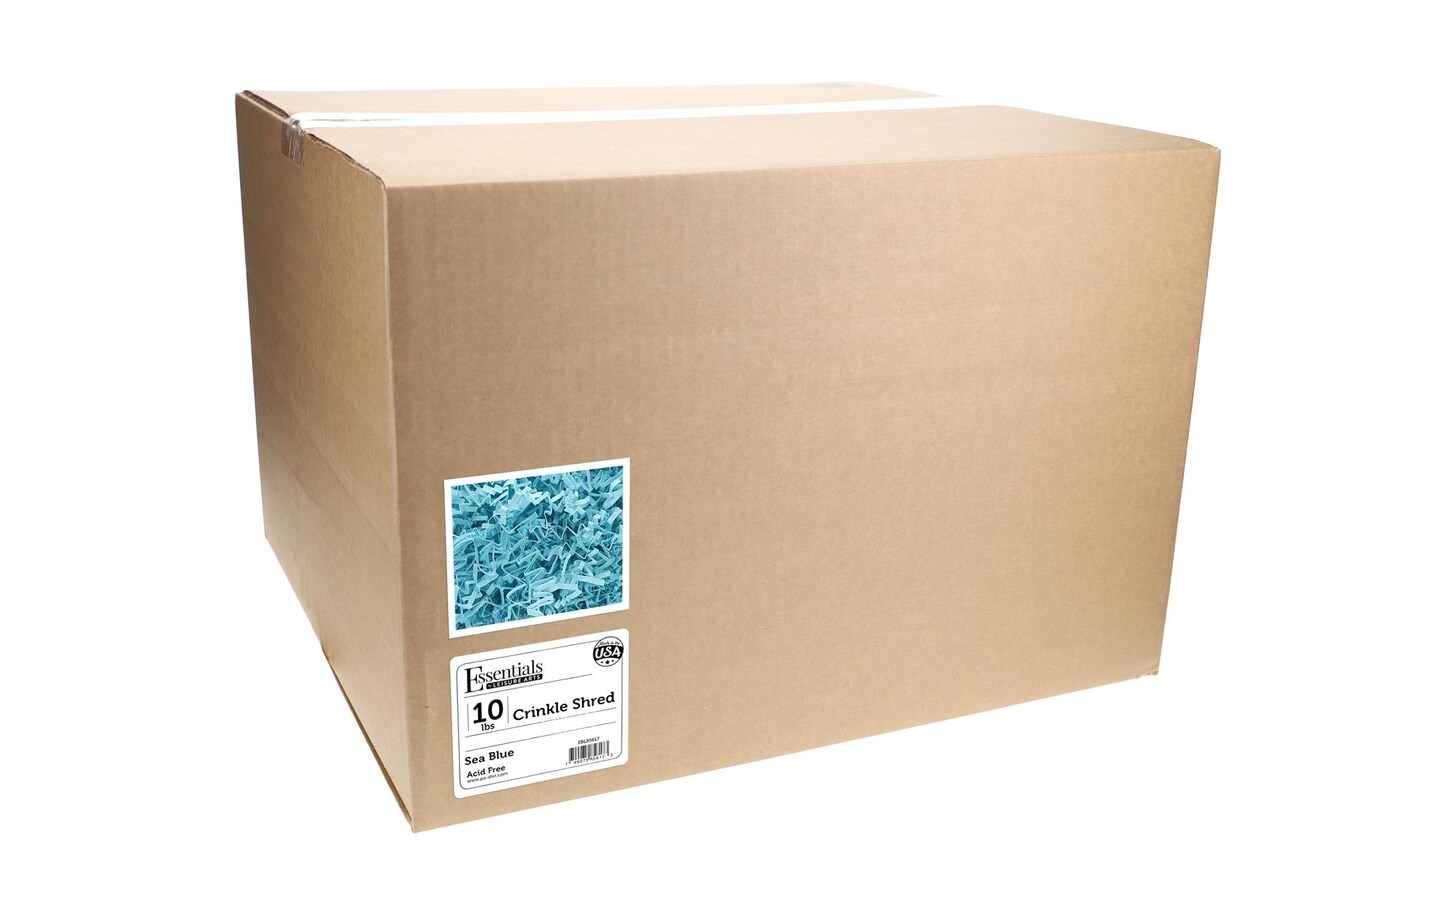 Essentials by Leisure Arts Crinkle Shred Box, Sea Blue, 10lbs Shredded Paper Filler, Crinkle Cut Paper Shred Filler, Box Filler, Shredded Paper for Gift Box, Paper Crinkle Filler, Box Filling